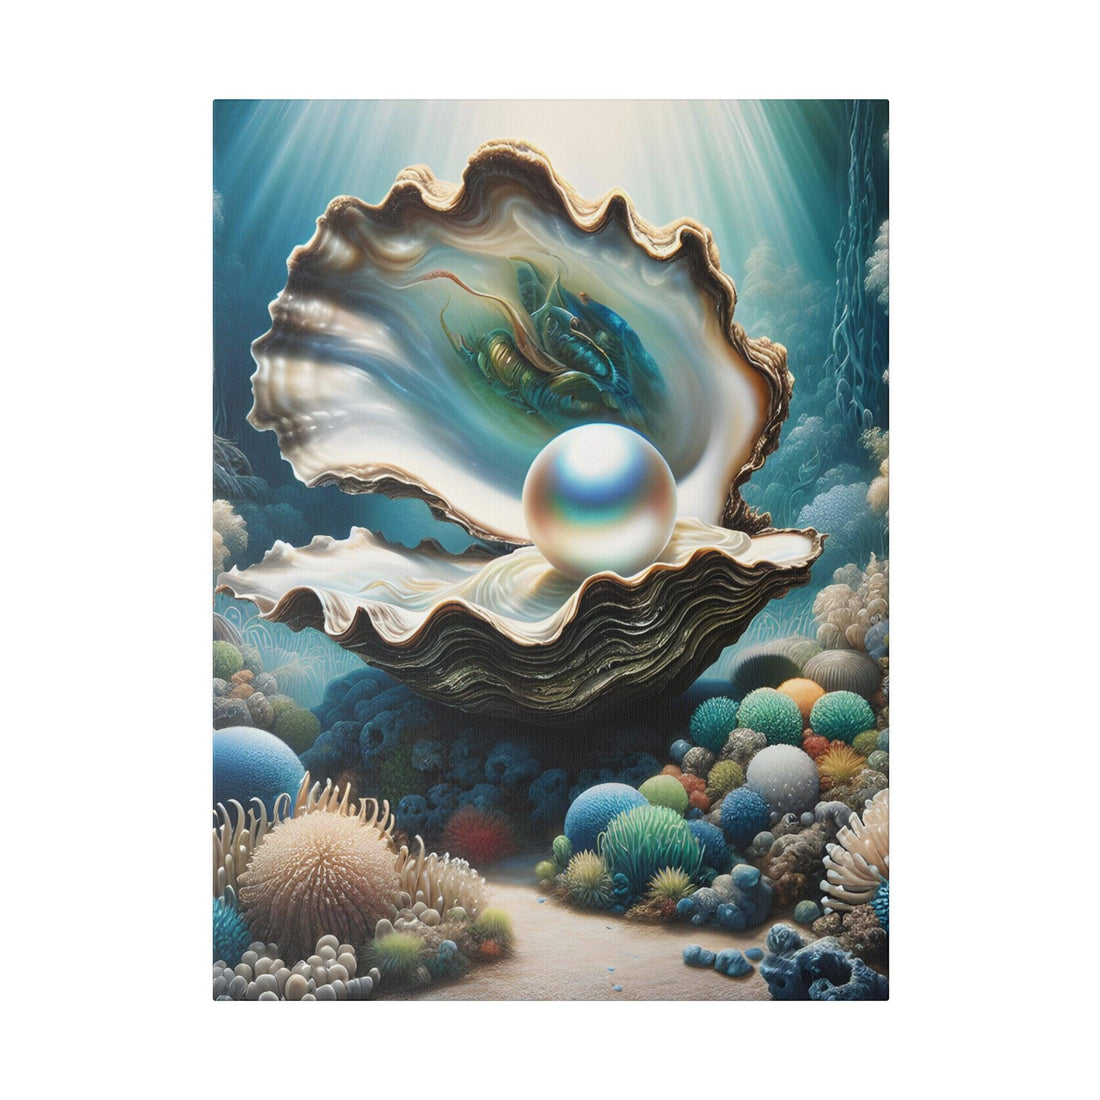 "Oyster Symphony: Canvas Wall Artistry" - The Alice Gallery